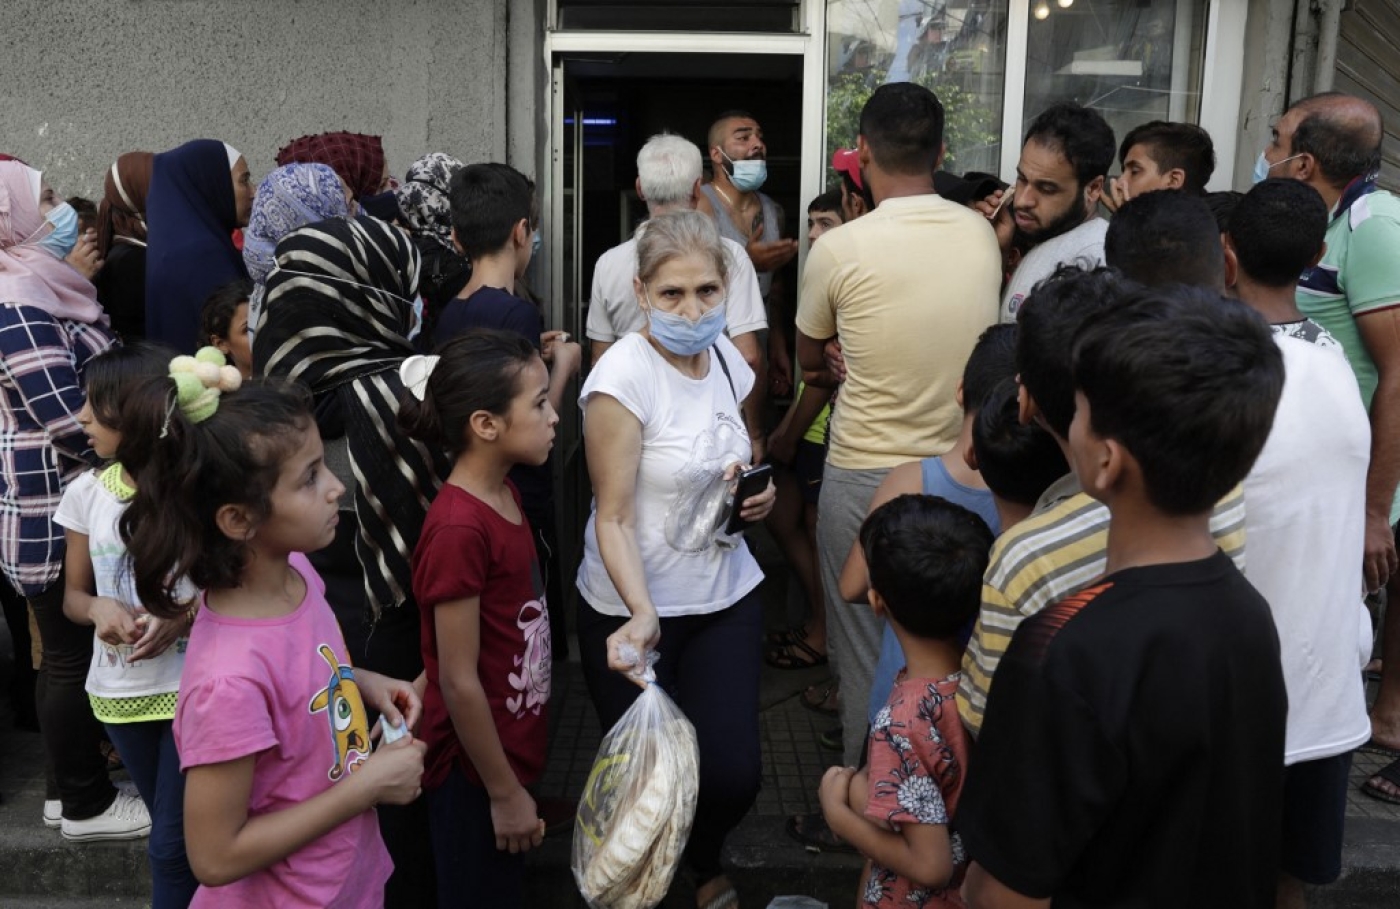 People wait in line at a bakery in the southern suburbs of Lebanon's Beirut on 13 August 2021, amidst a shortage of basic items due to a severe economic crisis.